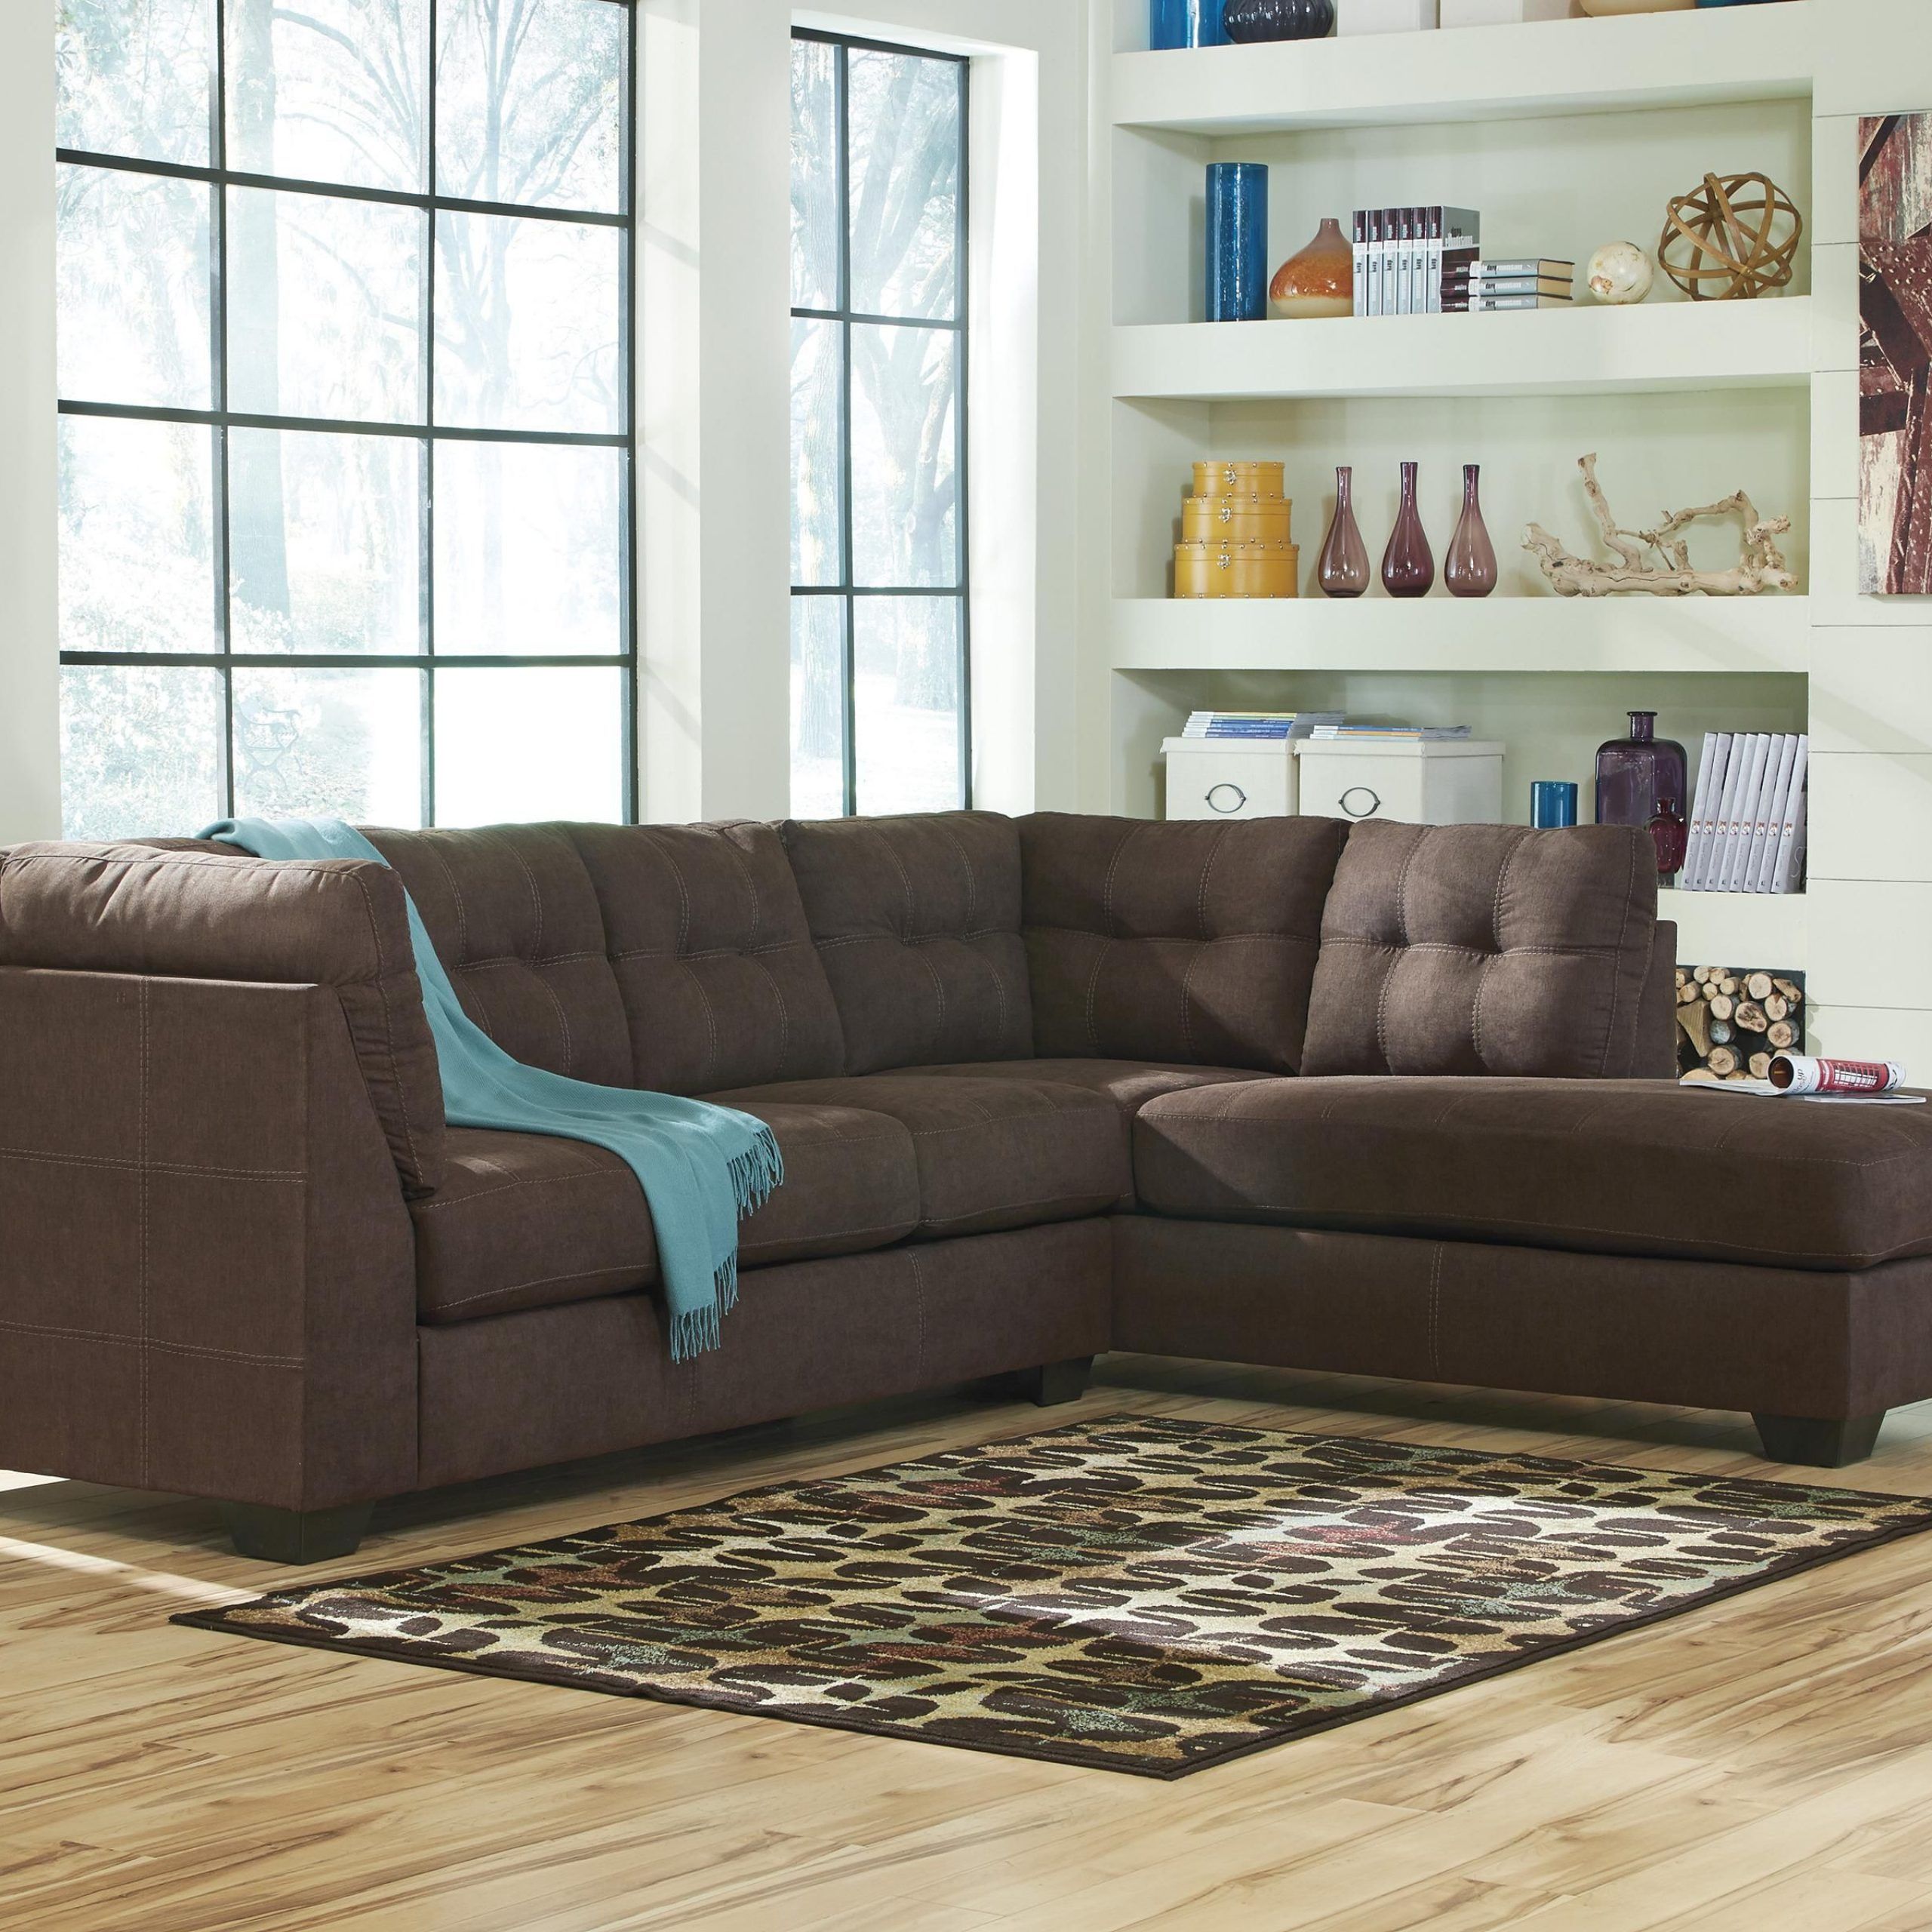 Most Recent Maier – Walnut 2 Piece Sectional With Left Chaise Pertaining To 2pc Maddox Right Arm Facing Sectional Sofas With Chaise Brown (View 2 of 20)